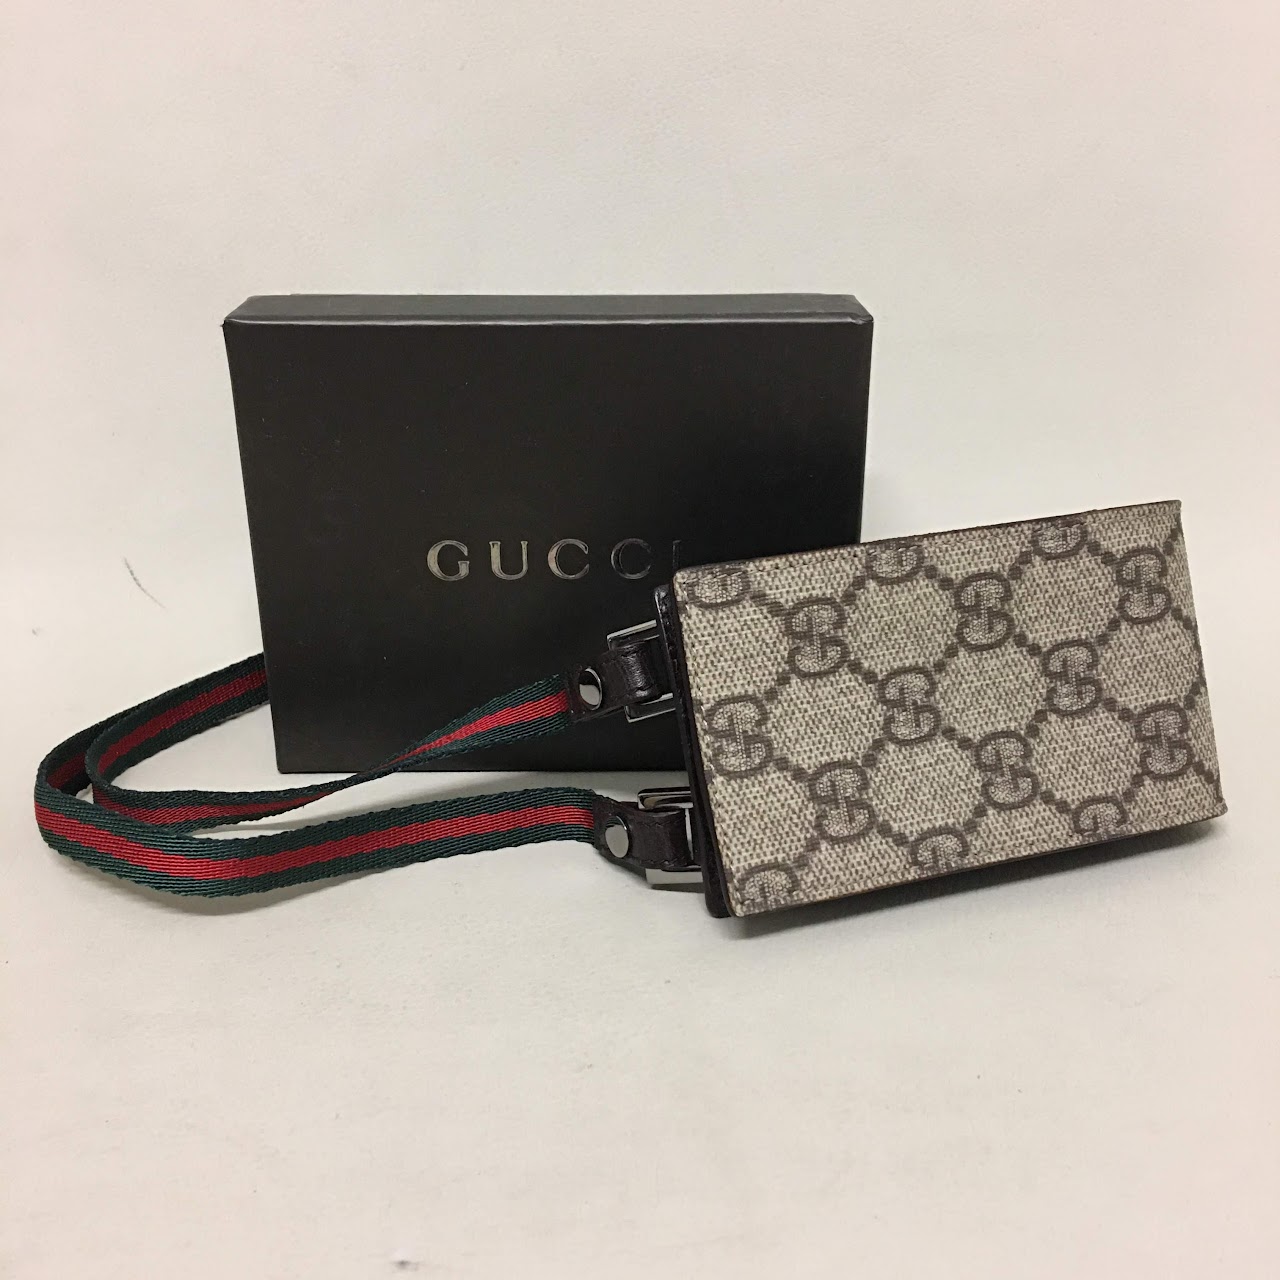 gucci cell phone purse